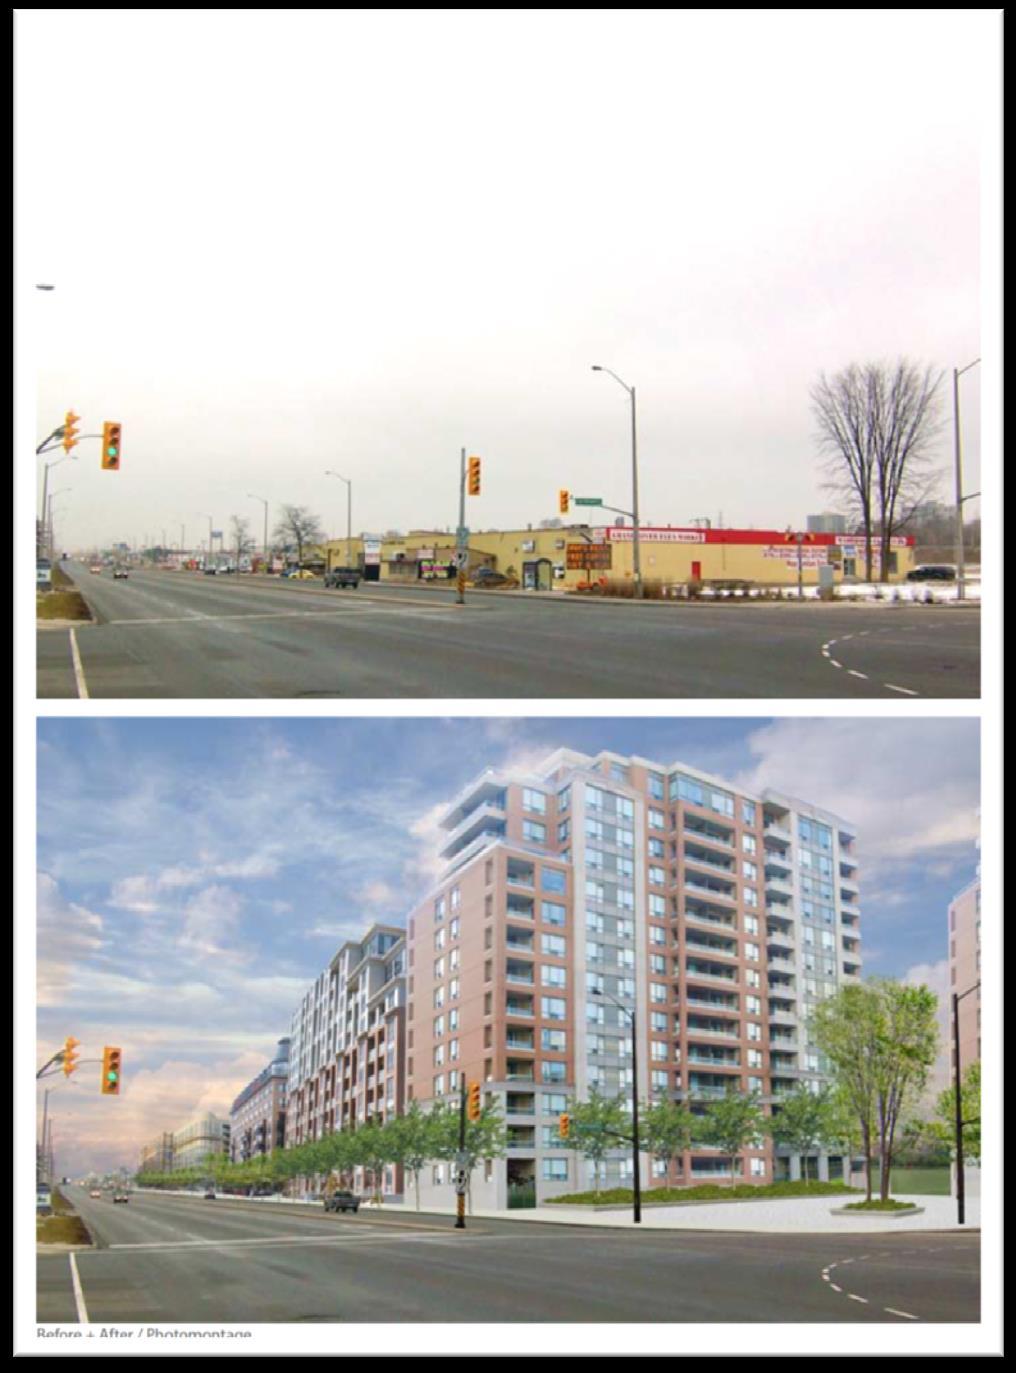 Example of Intensification Opportunities in Cambridge Note: Intensification opportunity illustrated on Hespeler Road in Cambridge T H E I M P O R T A N